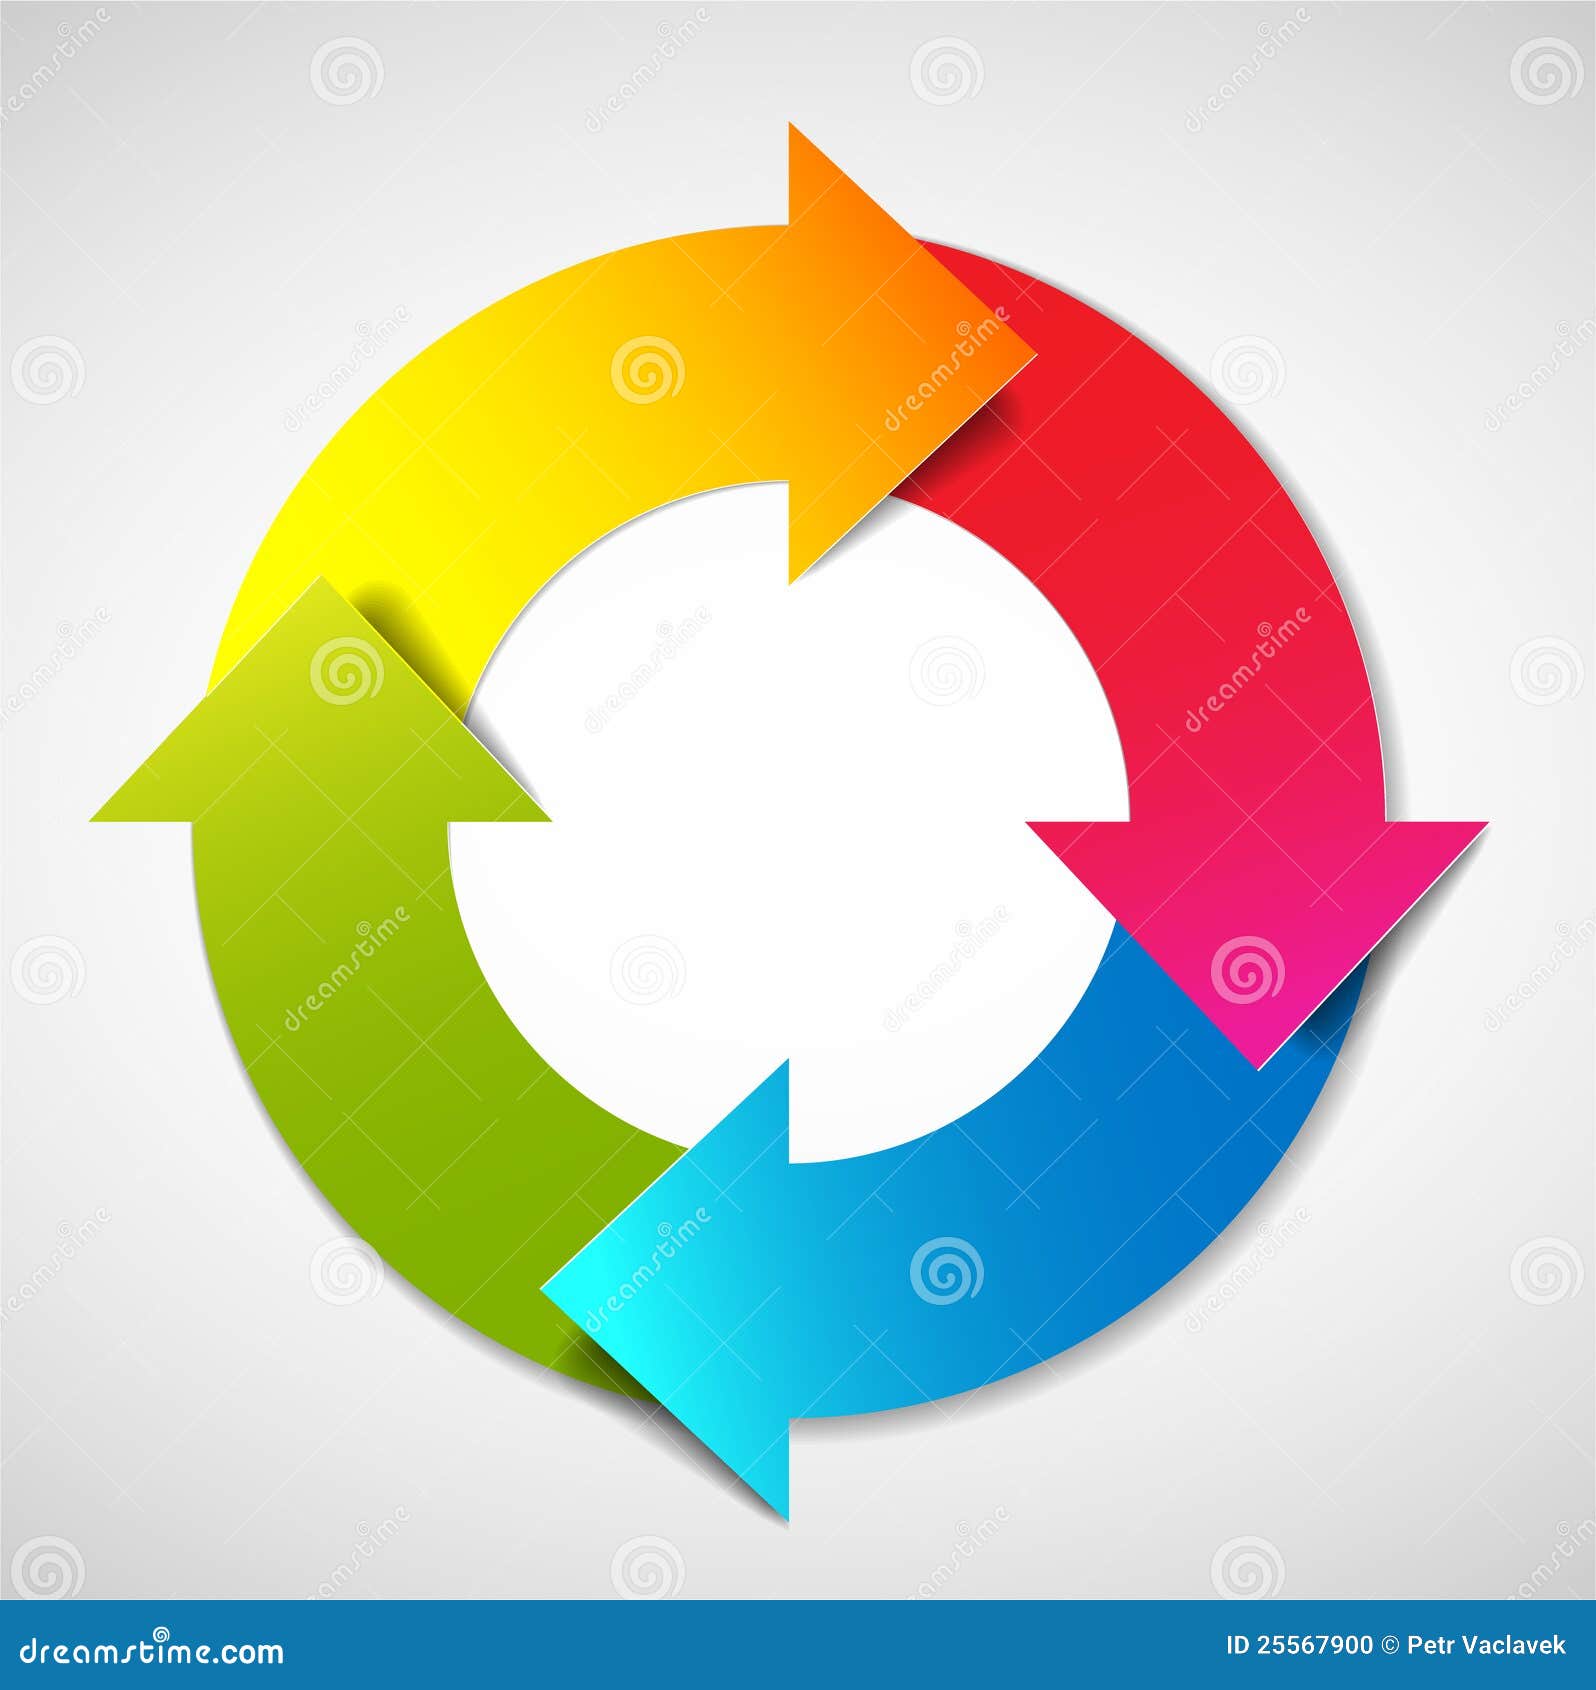 Vector Life Cycle Diagram Stock Vector  Image Of Life